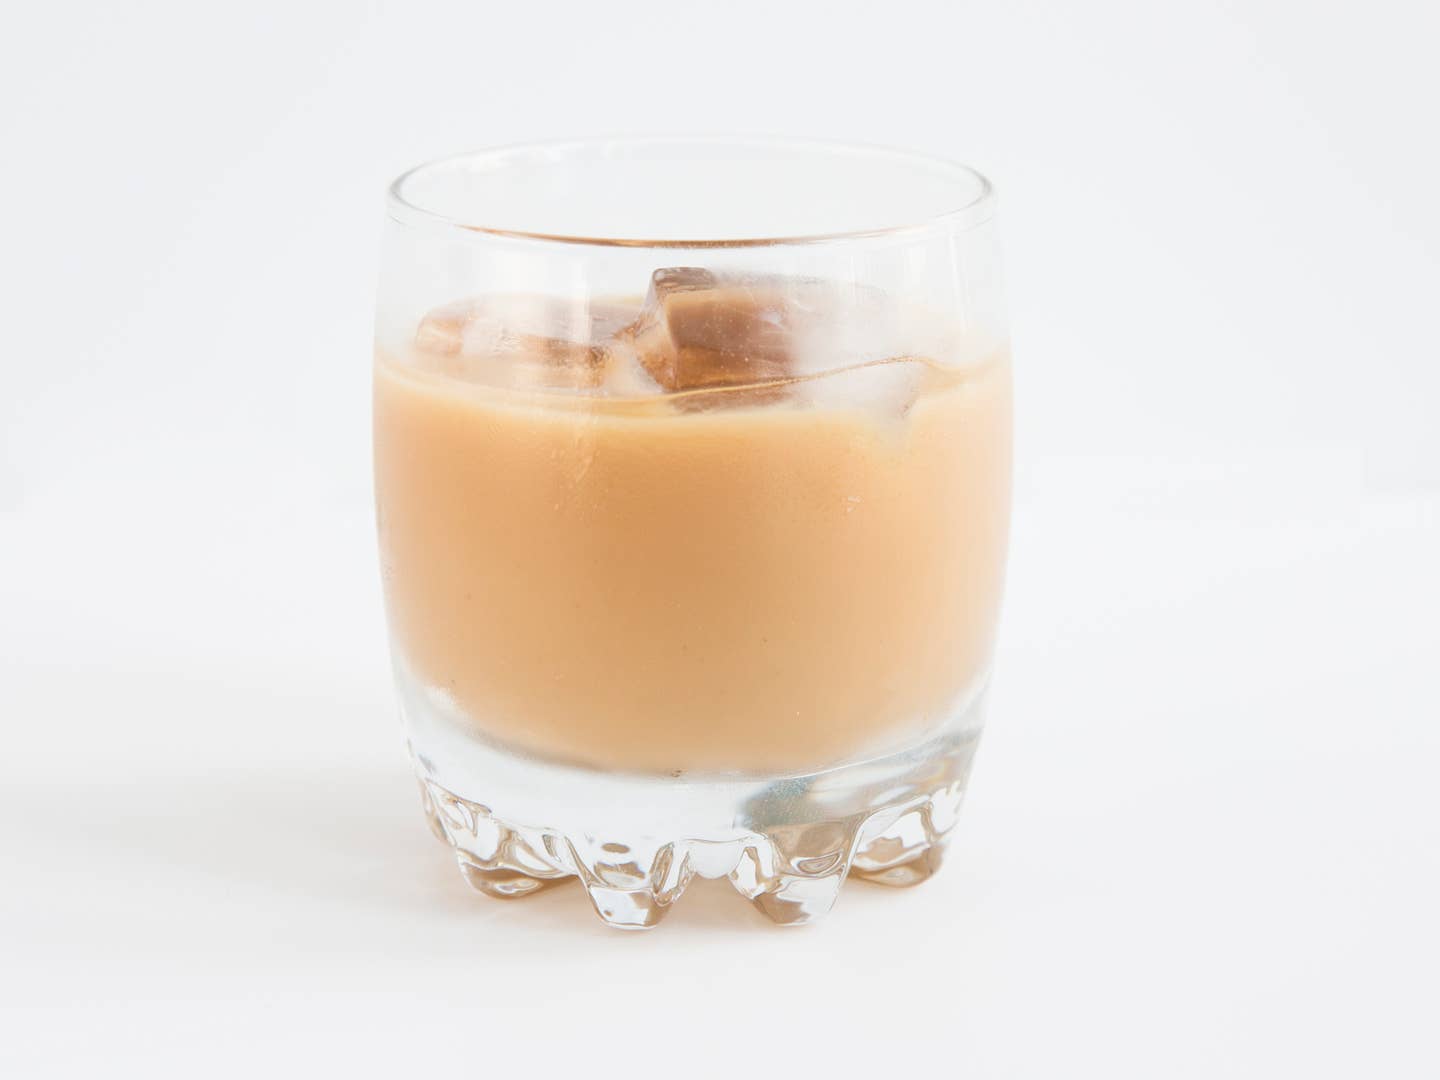 After-Dinner Coffee Meets Digestif in These 9 Cocktails